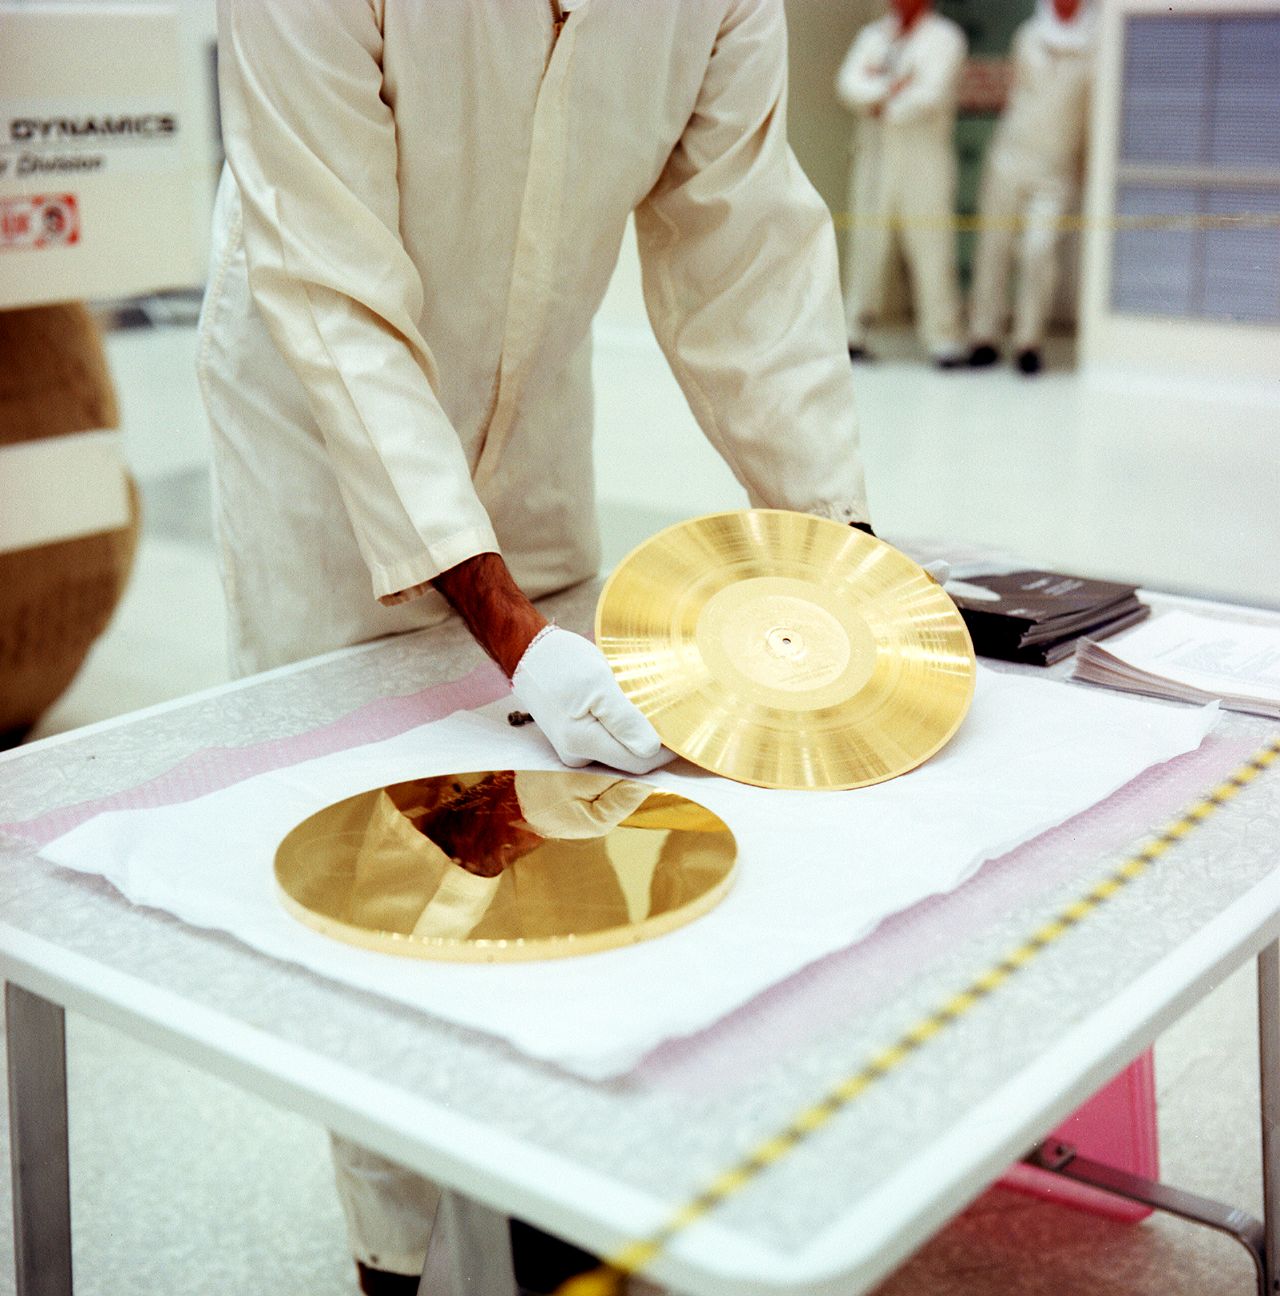 A man carefully places the golden record next to its cover in a NASA cleanroom.